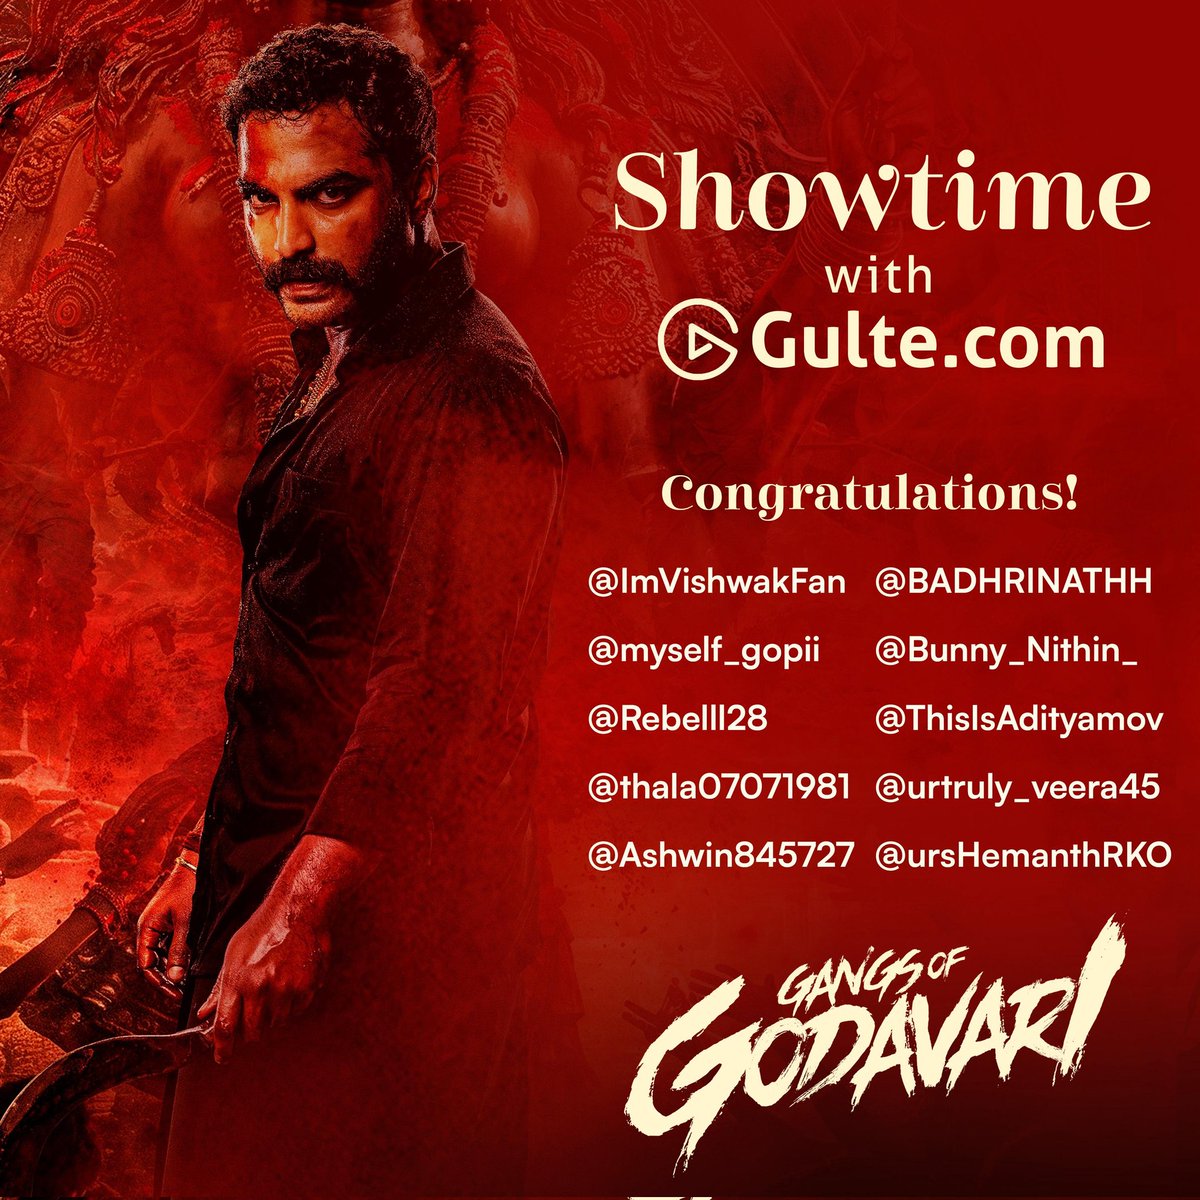 Congratulations to all the winners; please check your DM. Many more exciting giveaways are ahead. Until then, keep following GULTE - your source for rapid, precise, and exclusive updates. #ShowtimeWithGULTE #GangsOfGodavari